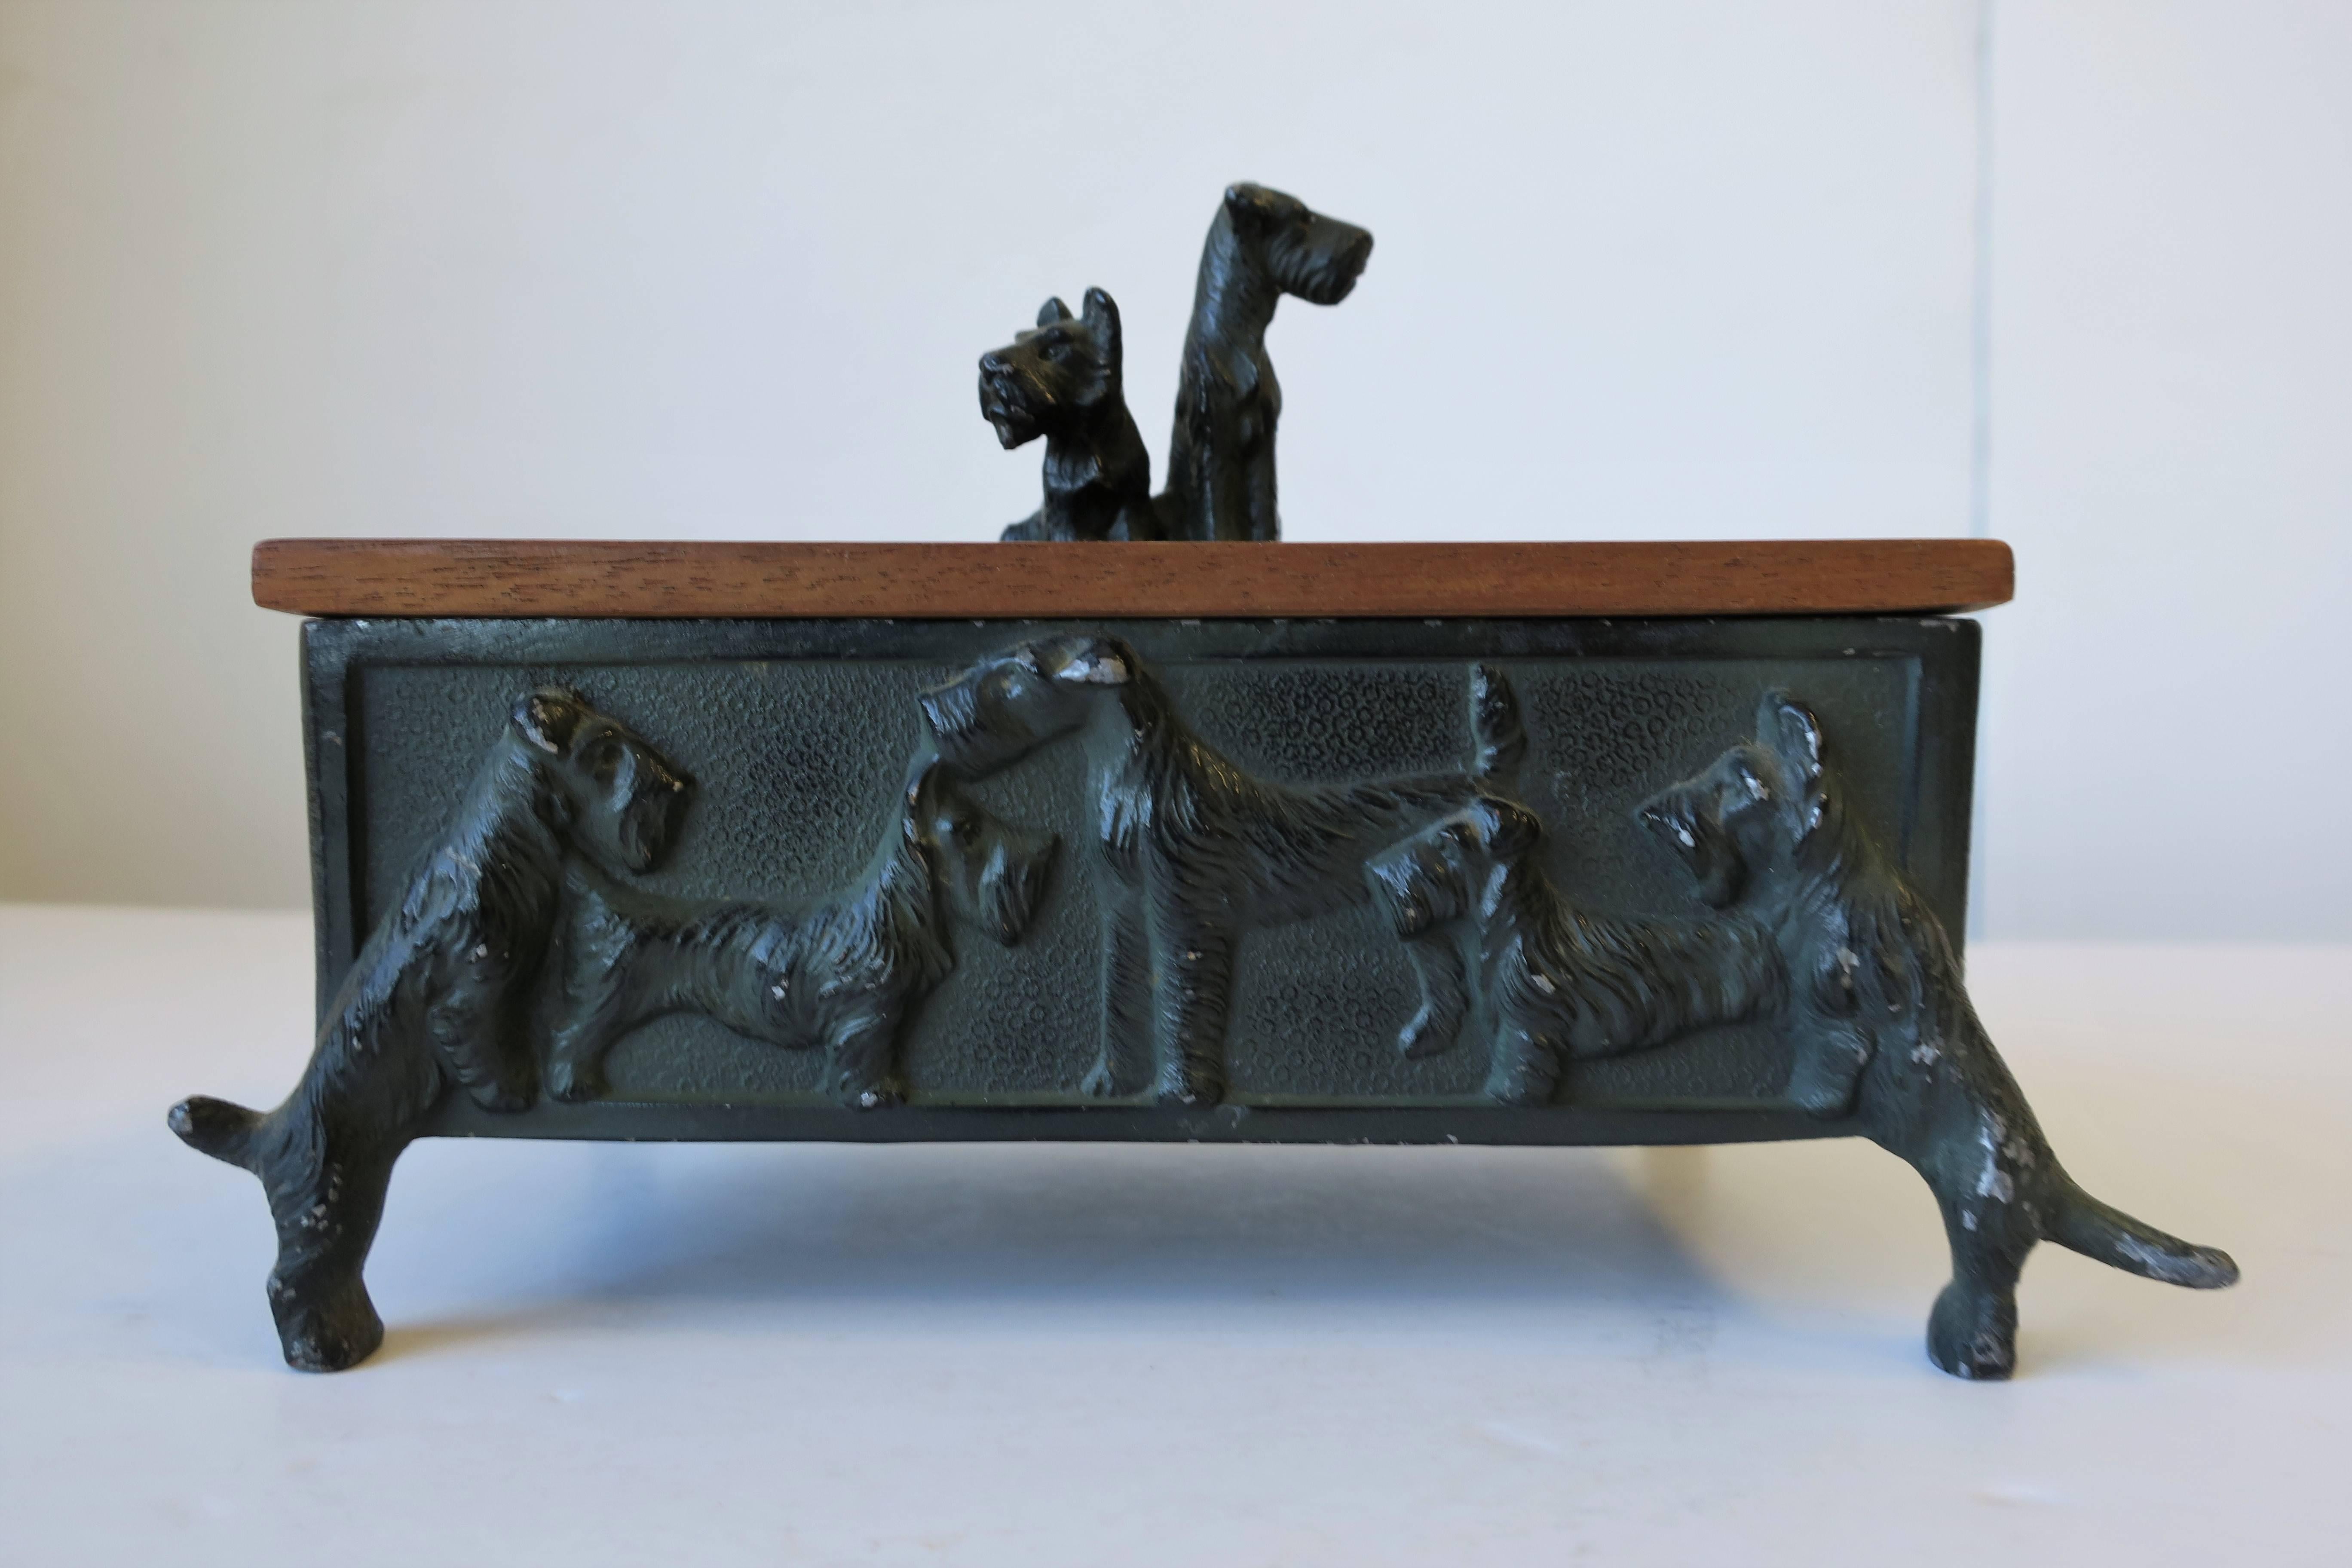 A substantial vintage iron and teak black Scottish Terrier 'Scottie' and Welch Terrier dog box, circa 1940s. Iron is painted in a black and dark or hunter green. Embossed Scottie and Welch terrier dogs surround outside of box. Teak wood interior and